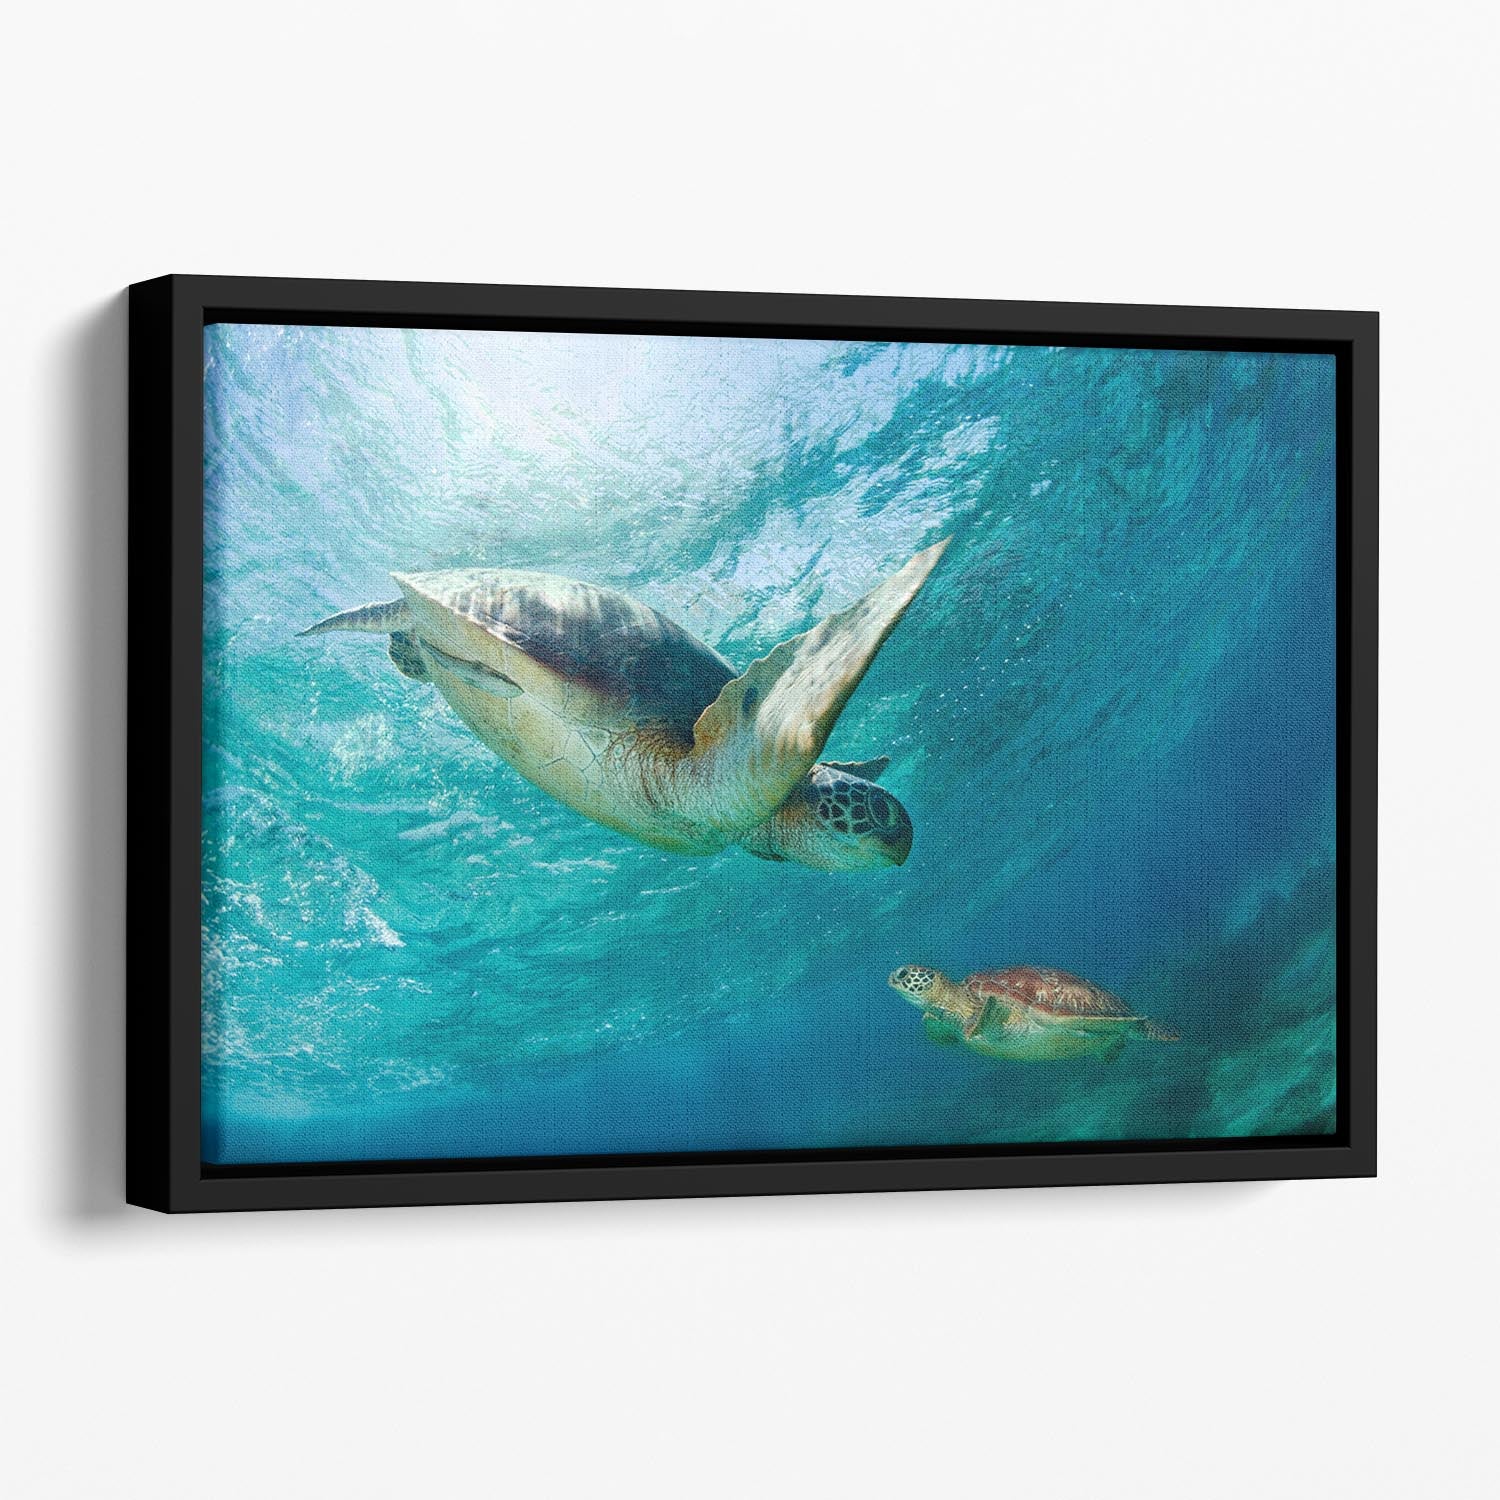 Contact Floating Framed Canvas - Canvas Art Rocks - 1